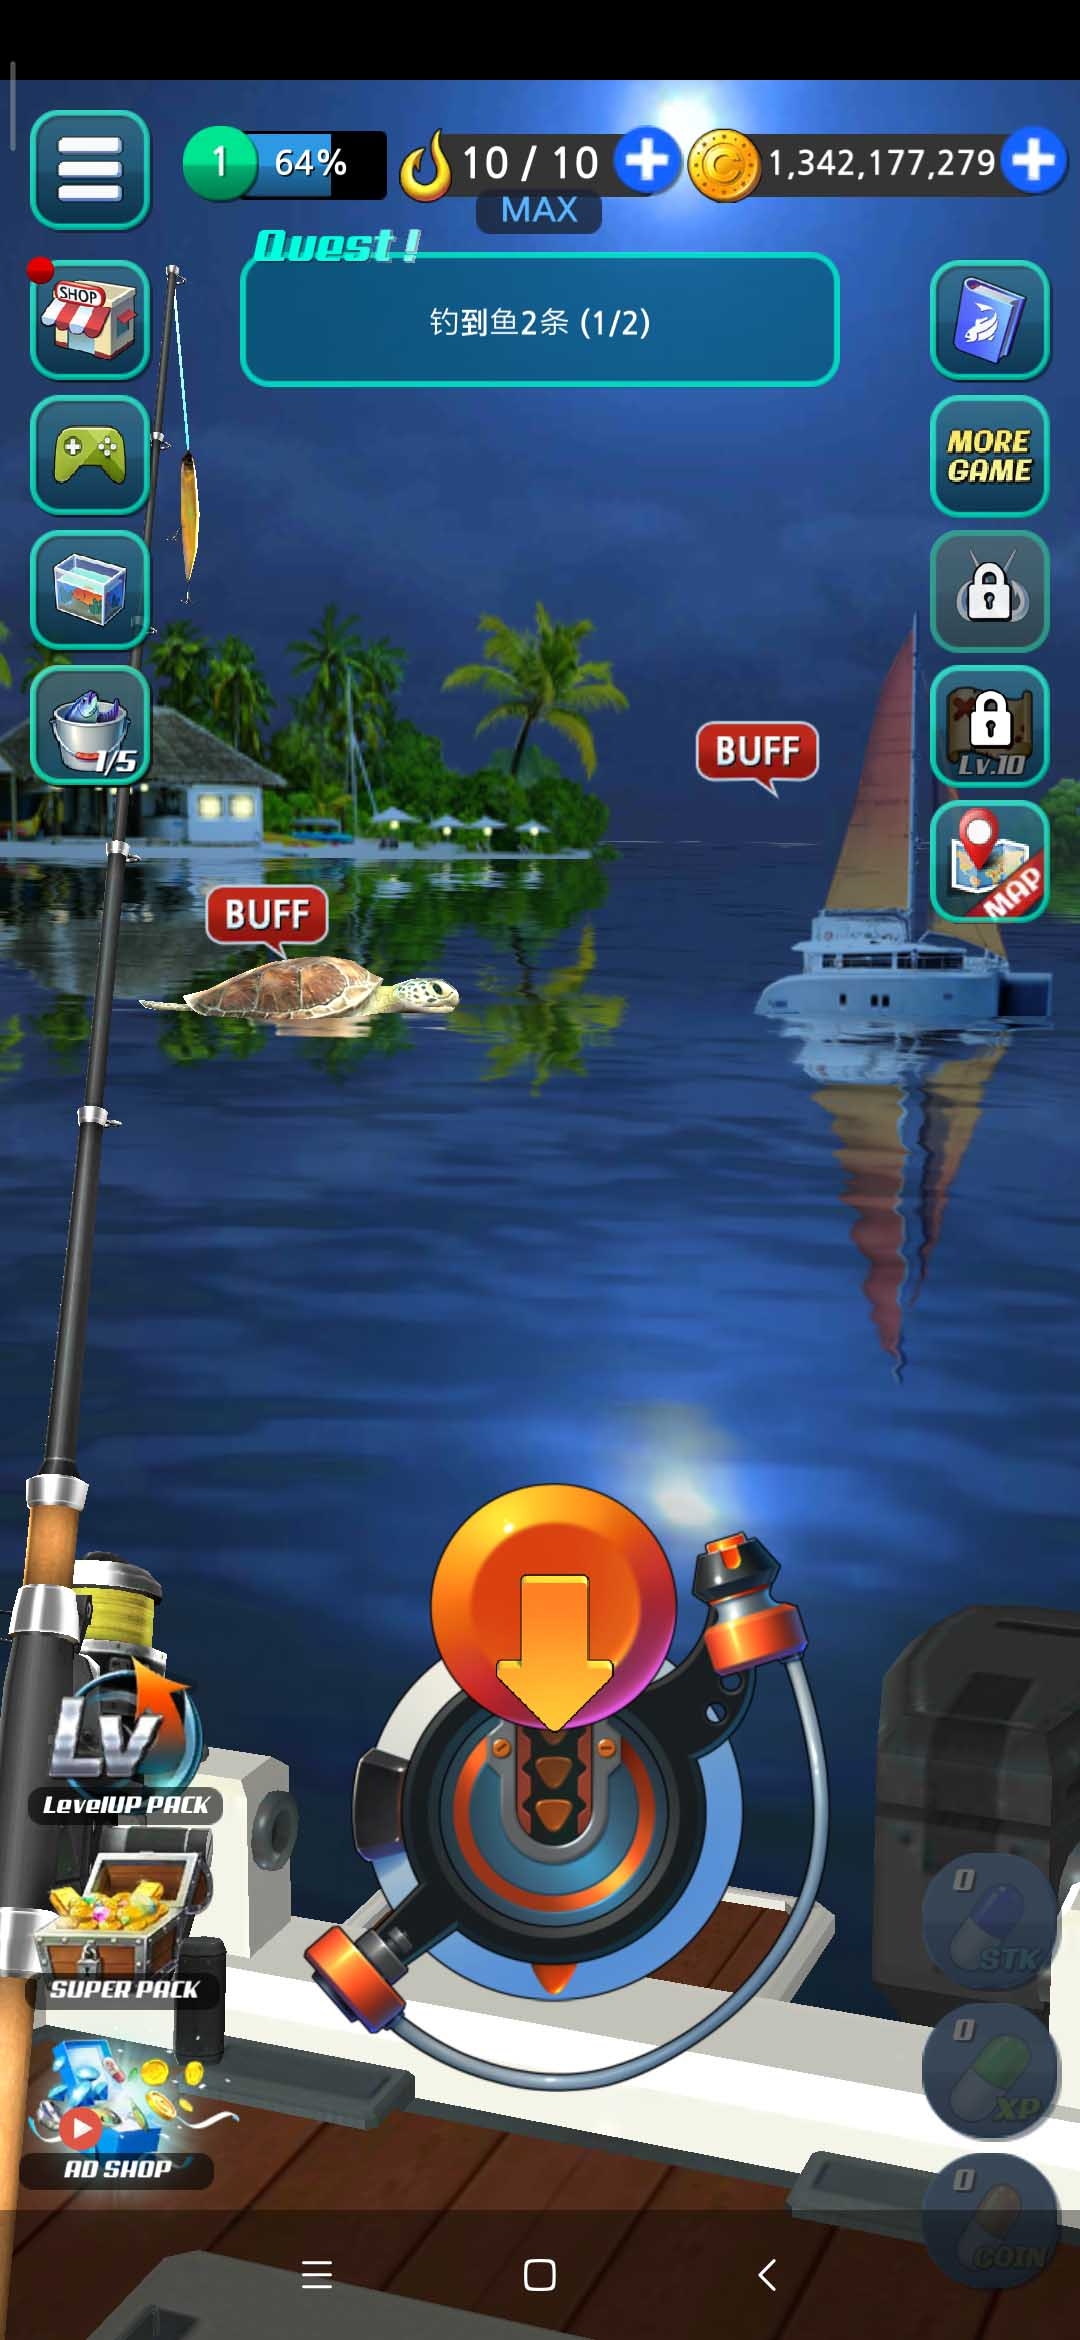 Fishing Hook MOD APK 2.4.8 (Unlimited Money) Android